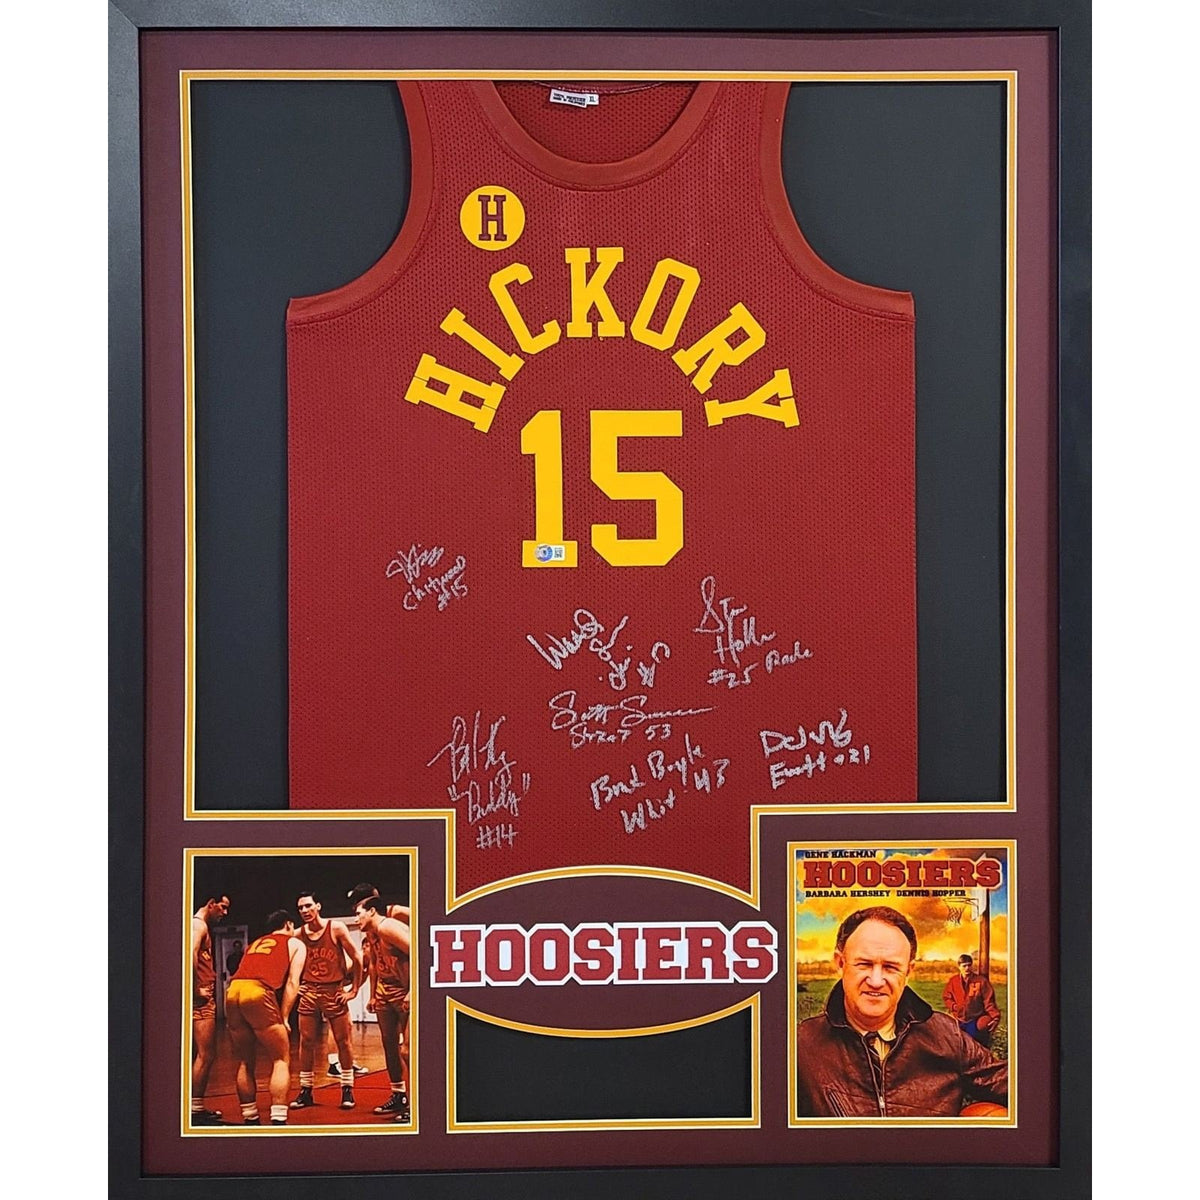 Hoosiers Movie Framed Signed by Cast Jersey Autographed Beckett